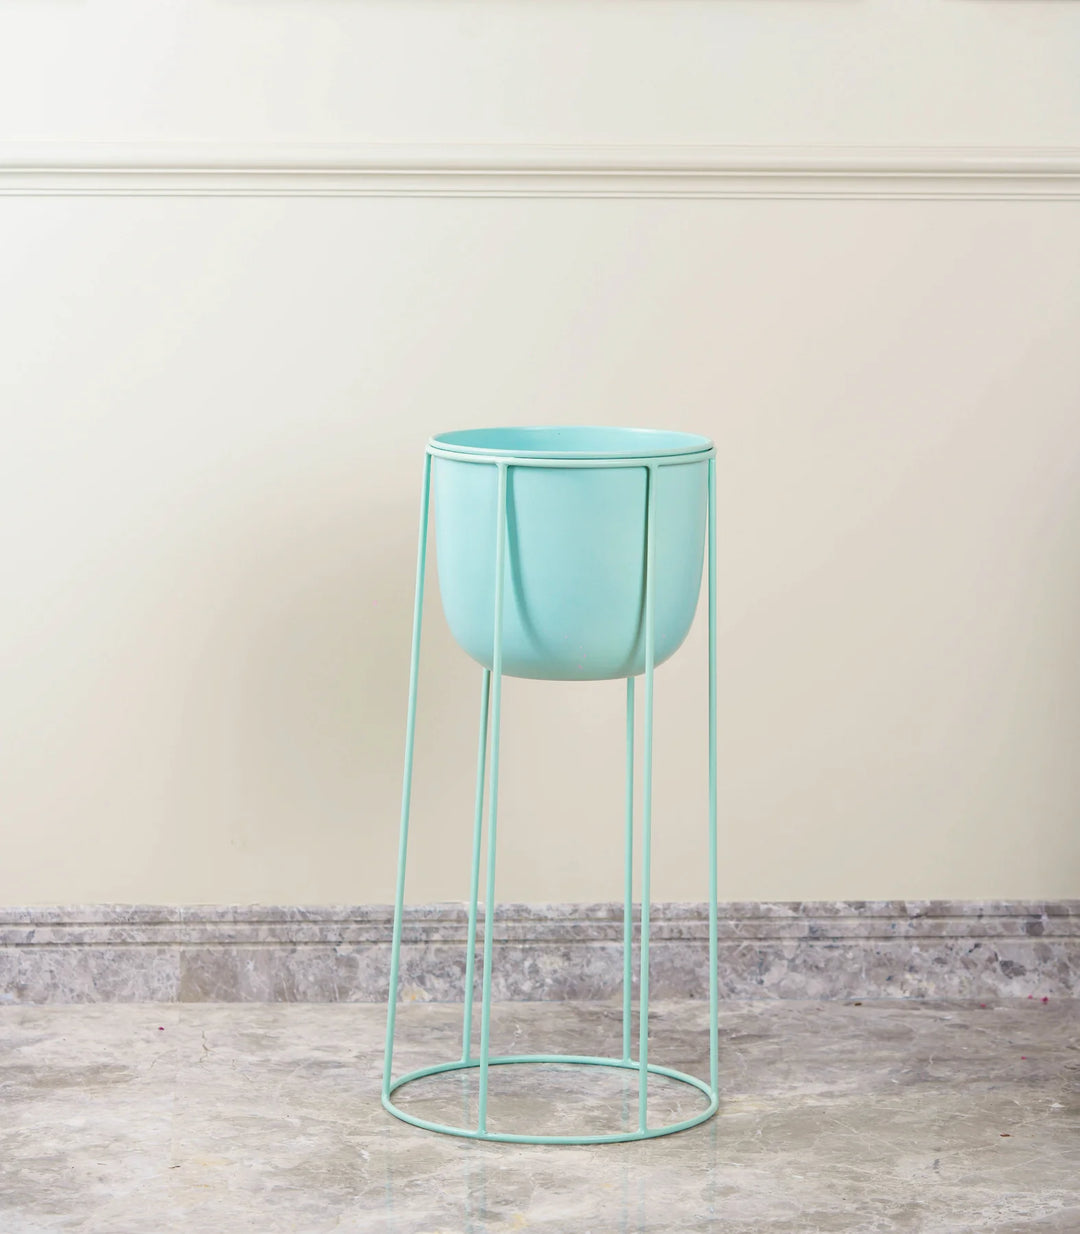 24 Inch Metal Floor Planter with Stand | Large Metal Floor Planter in Pastel Colors (24 Inch) with Stand